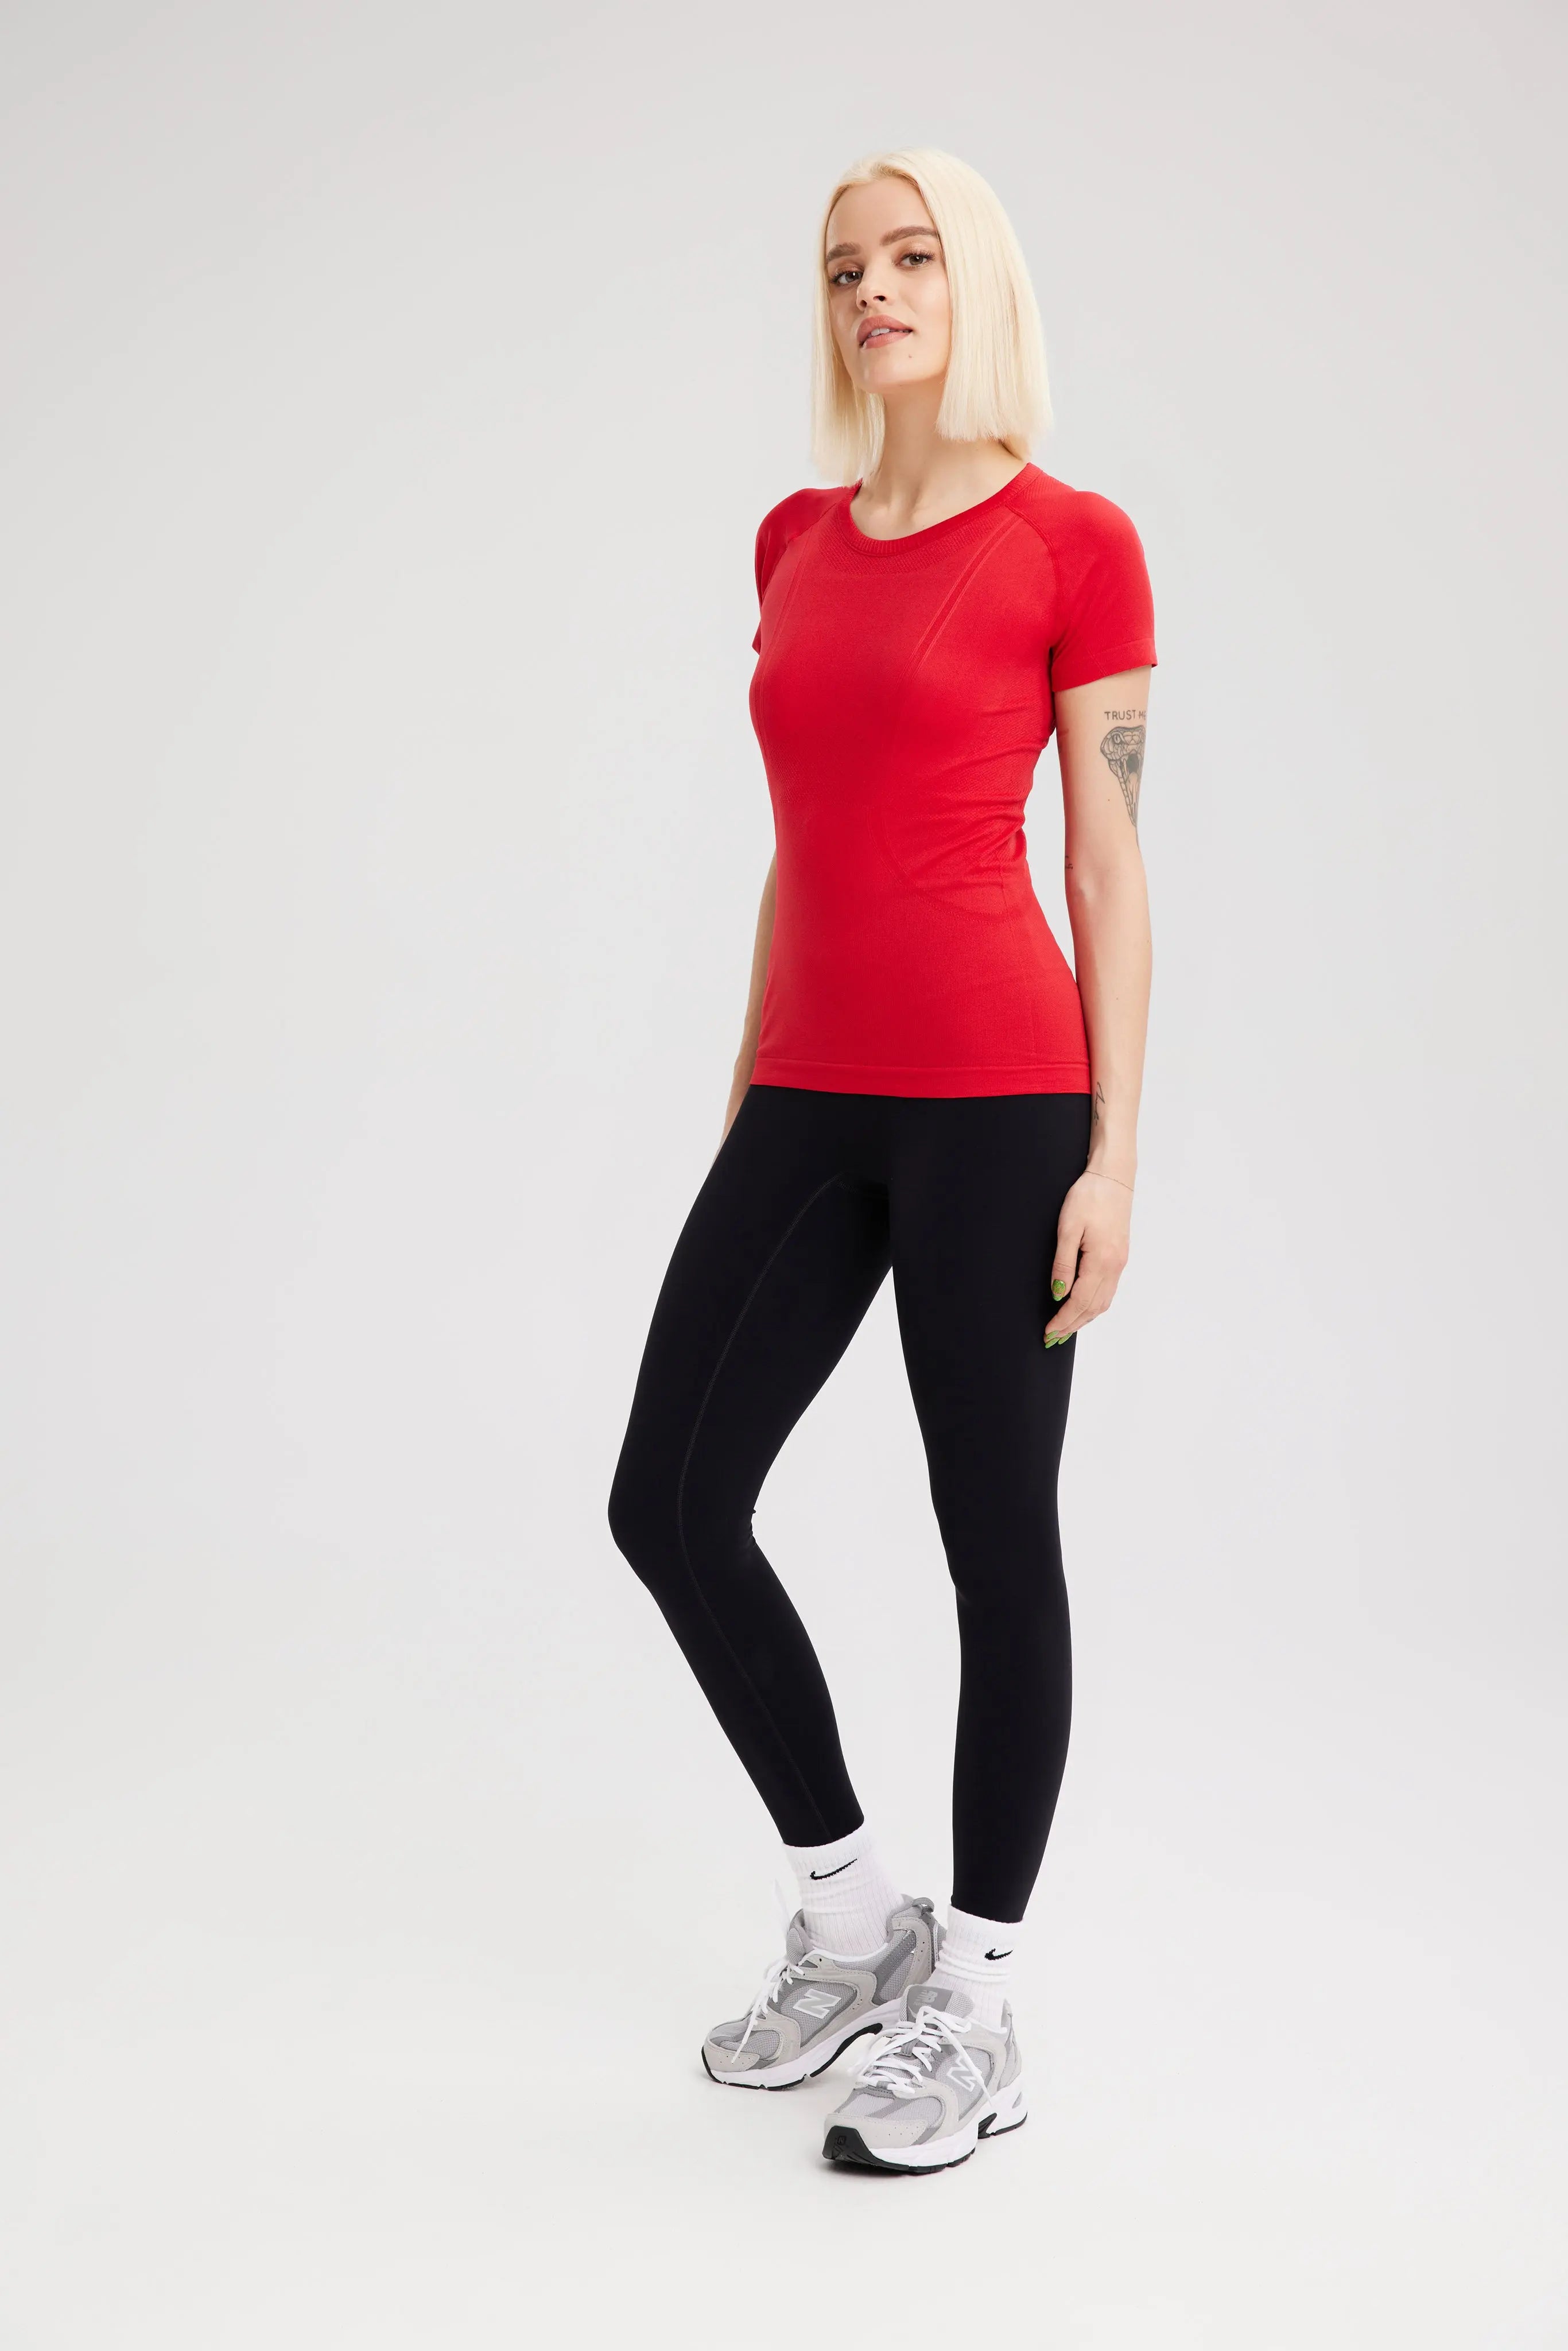 EKJ Women's Active Stretch T-Shirt - Vibrant Red My Store